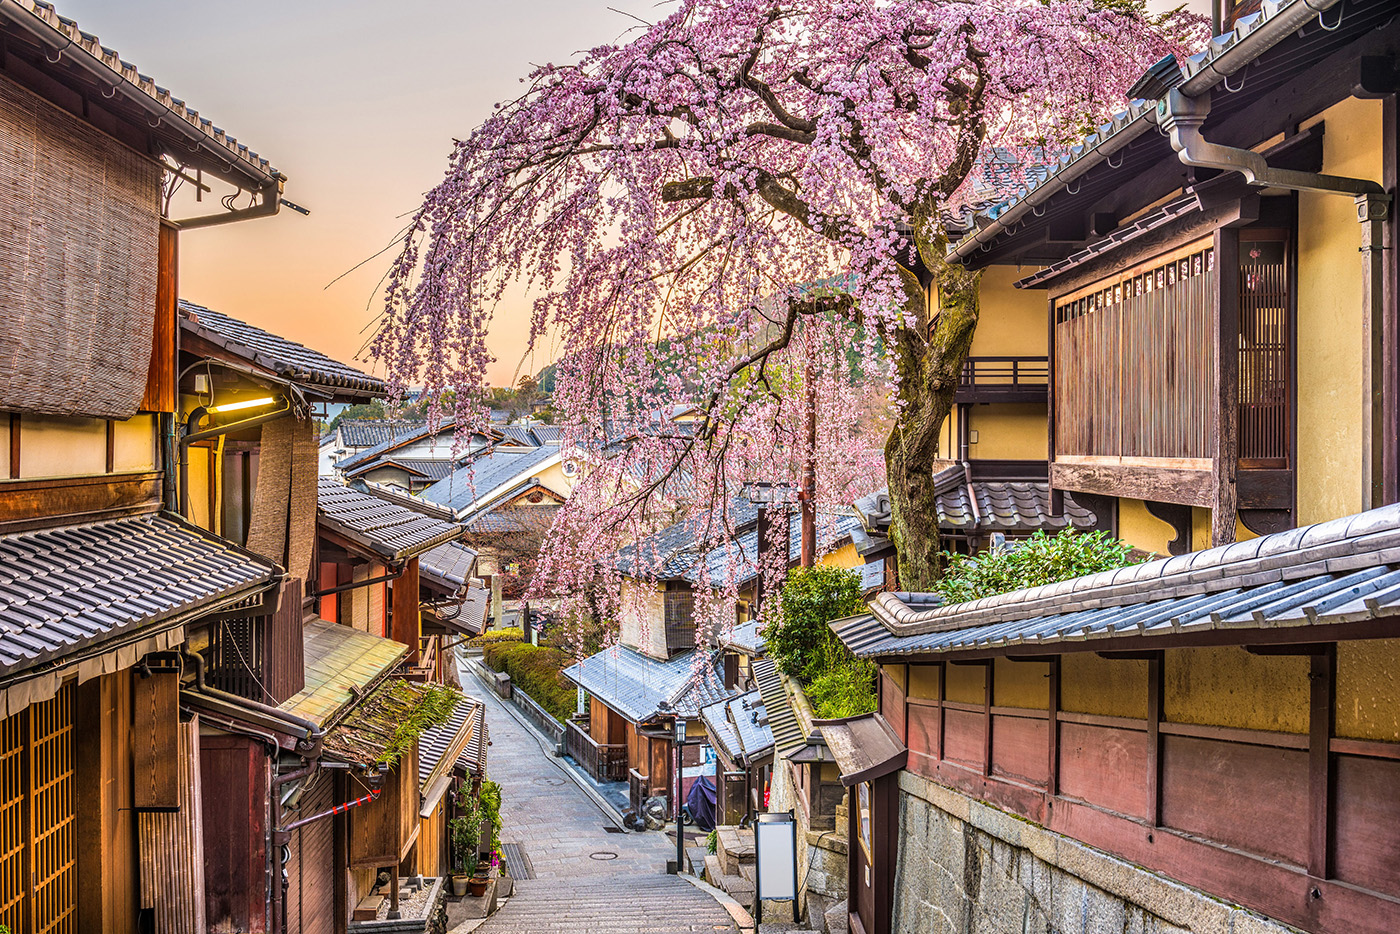 See cherry blossoms amid Kyoto’s temples, sweeping gardens, and dazzling imperial palaces